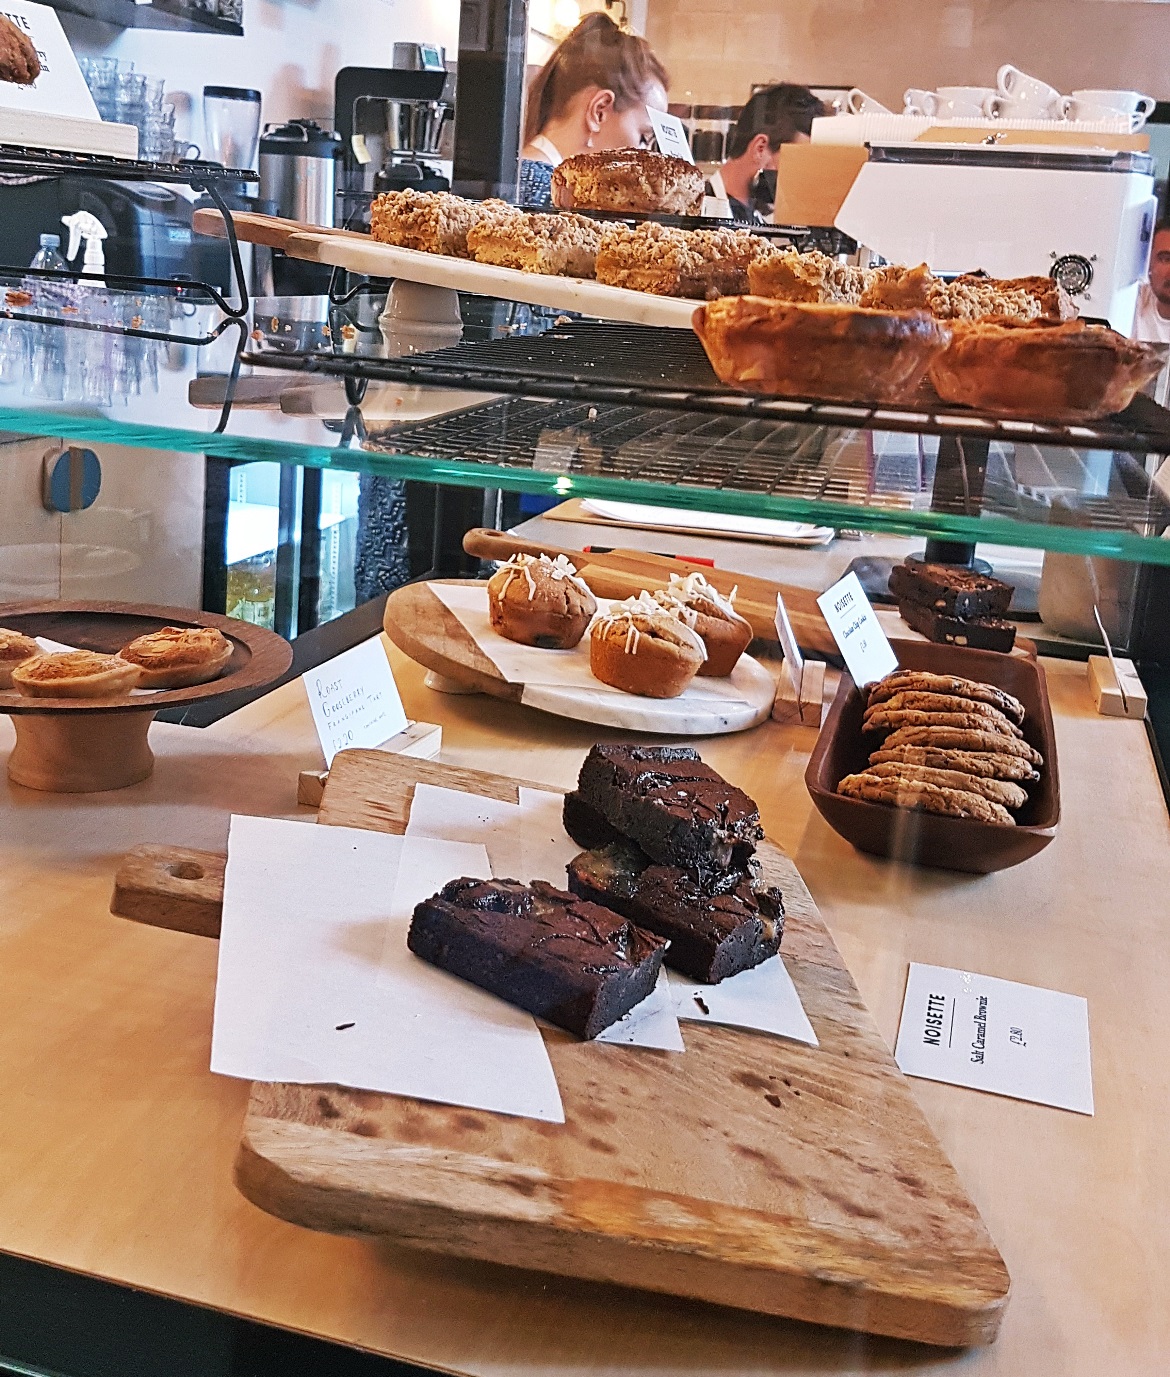 Fresh Noisette cakes - Review of North Star Coffee Shop by BeckyBecky Blogs